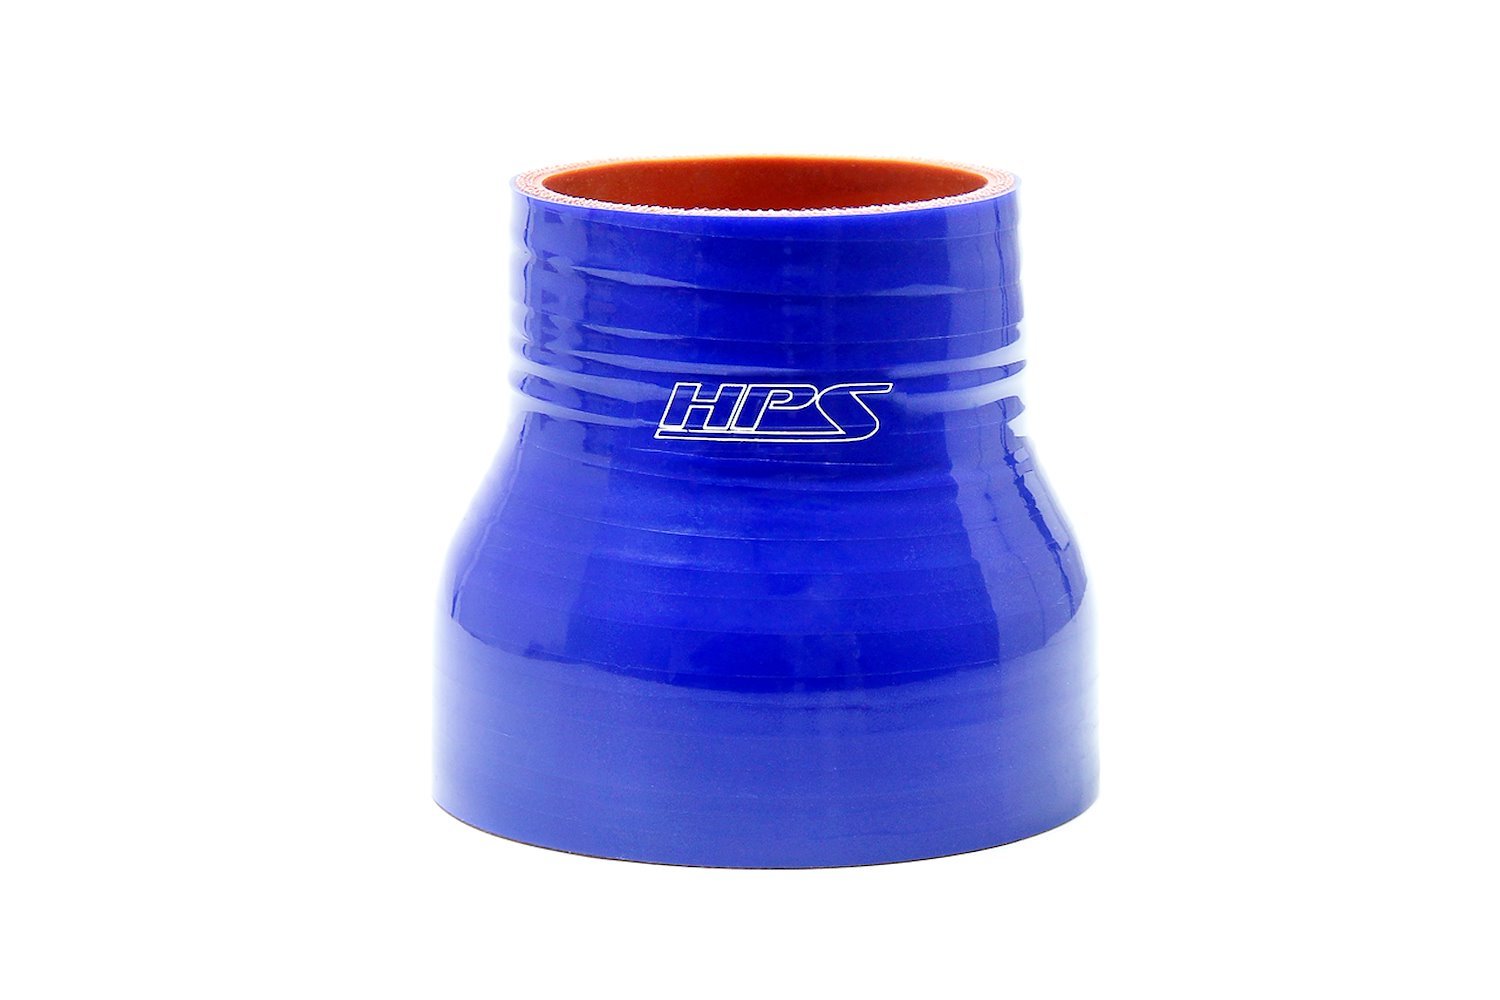 HTSR-150-238-BLUE Silicone Reducer Hose, High-Temp 4-Ply Reinforced, 1-1/2 in. - 2-3/8 in. ID, 3 in. Long, Blue